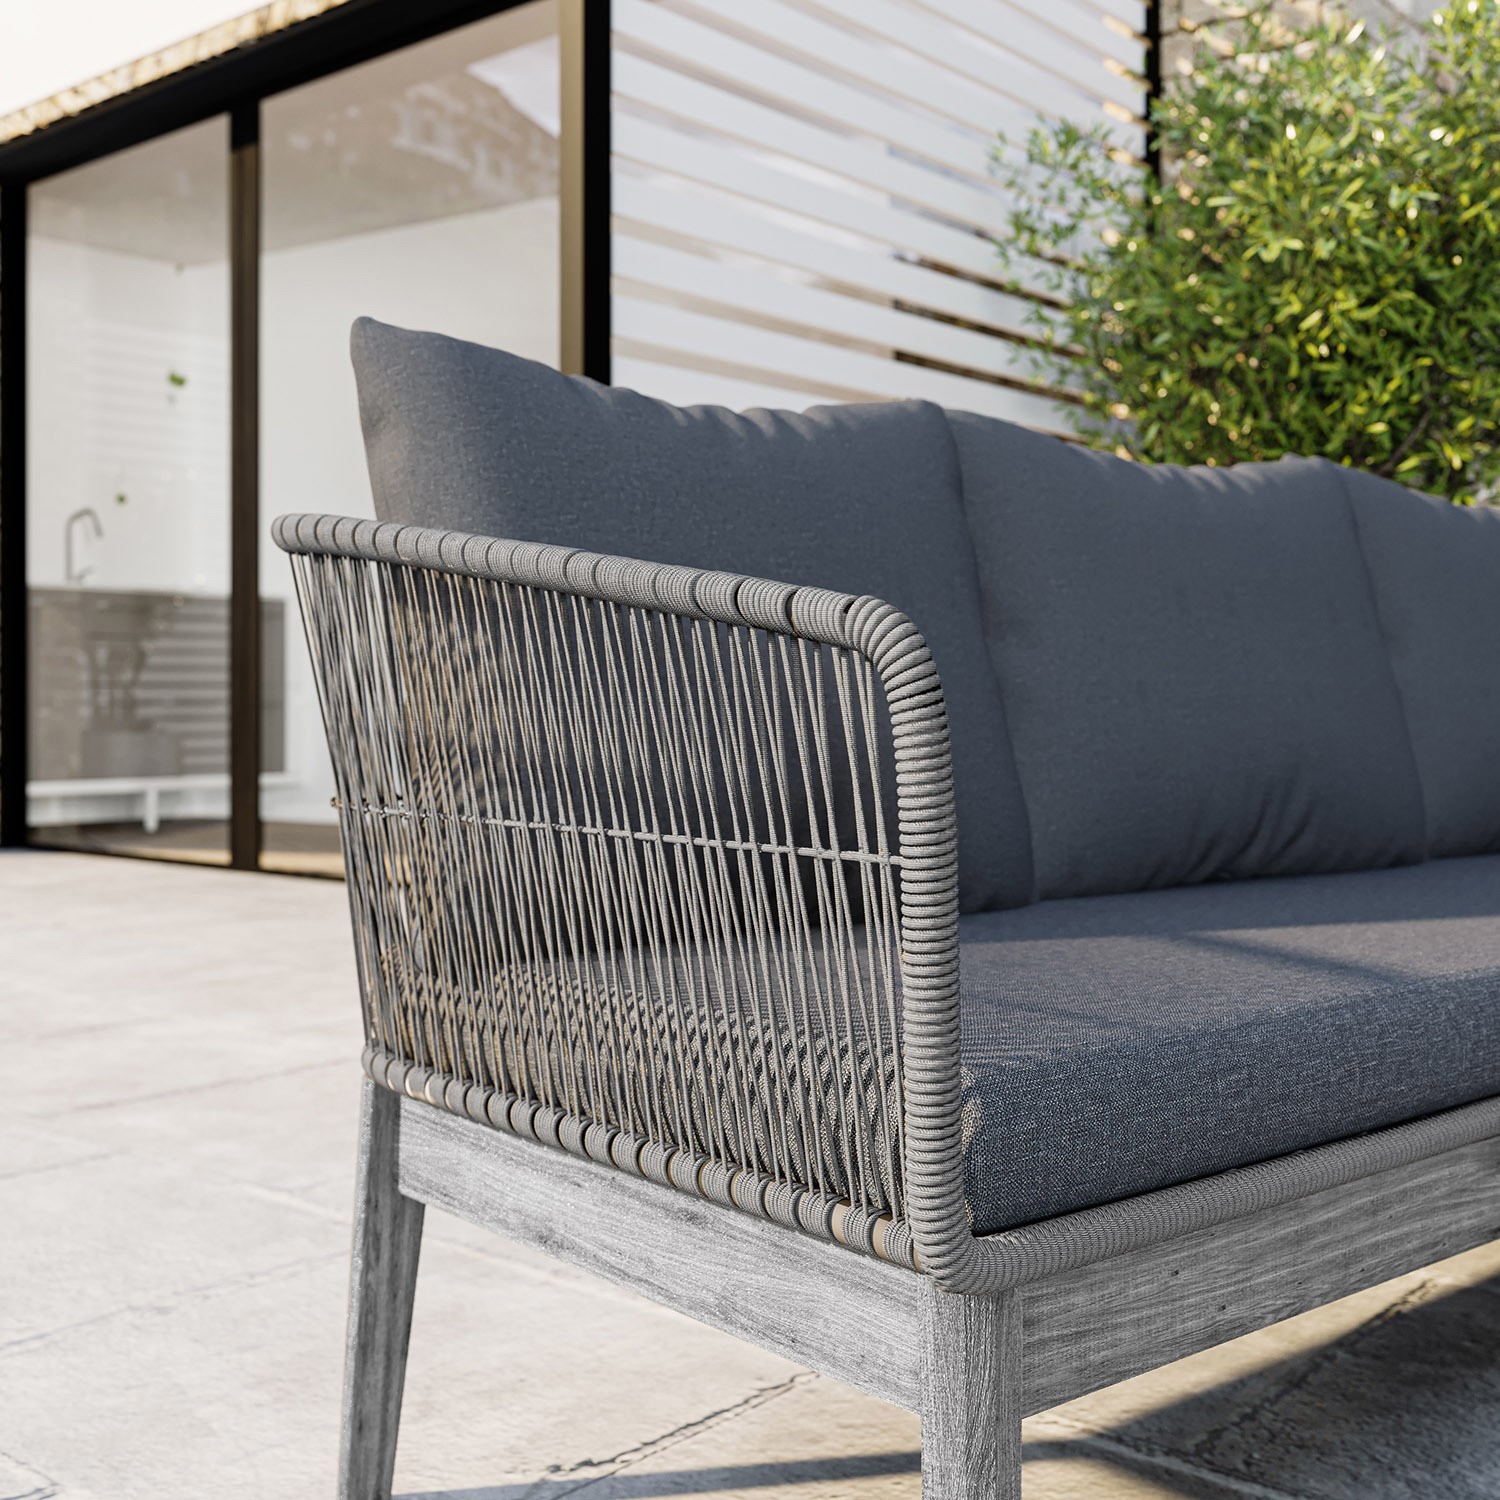 Read more about 5 seater grey rope effect garden corner sofa set with table como